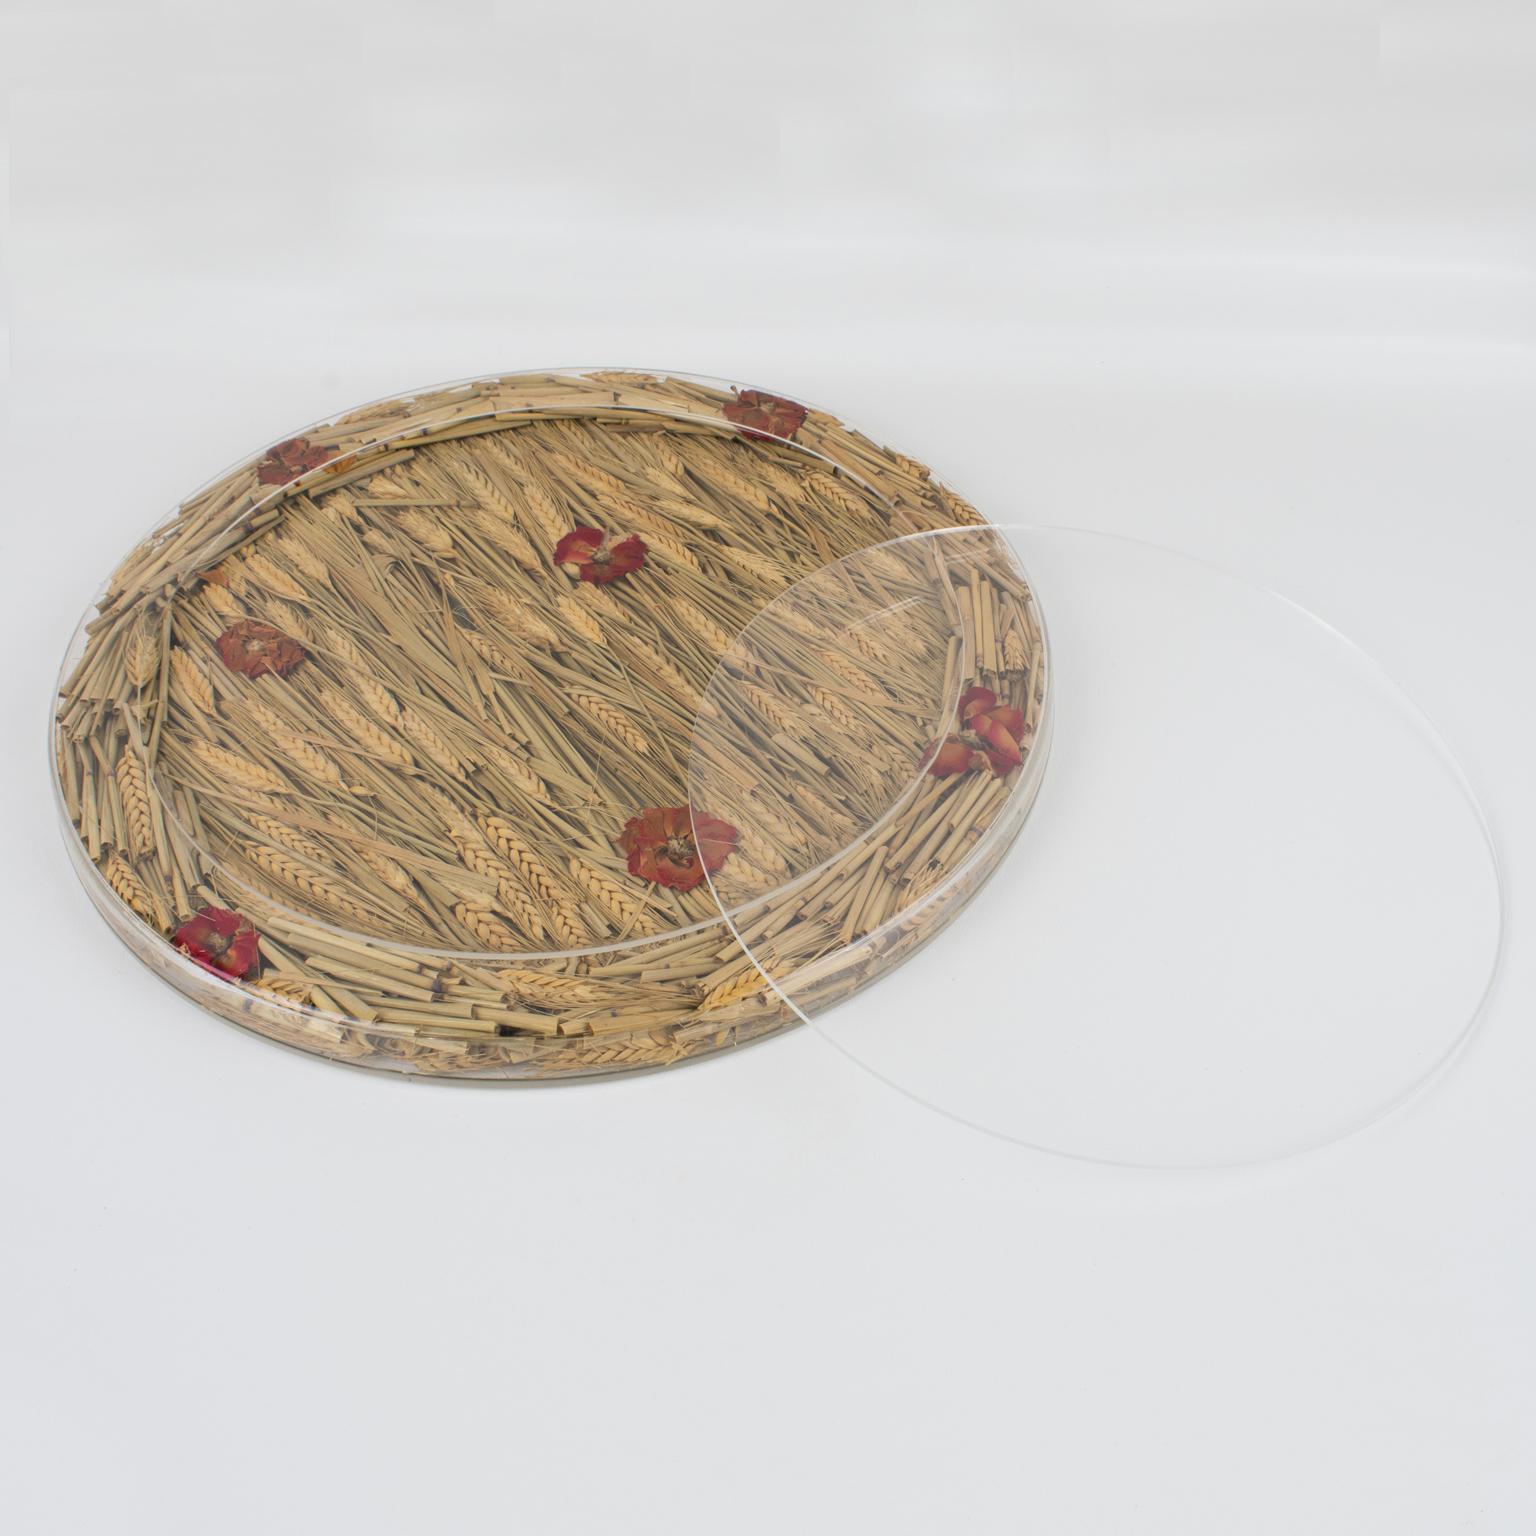 Late 20th Century Christian Dior Tray Board Platter Lucite, Wheat and Dried Flowers. 1972